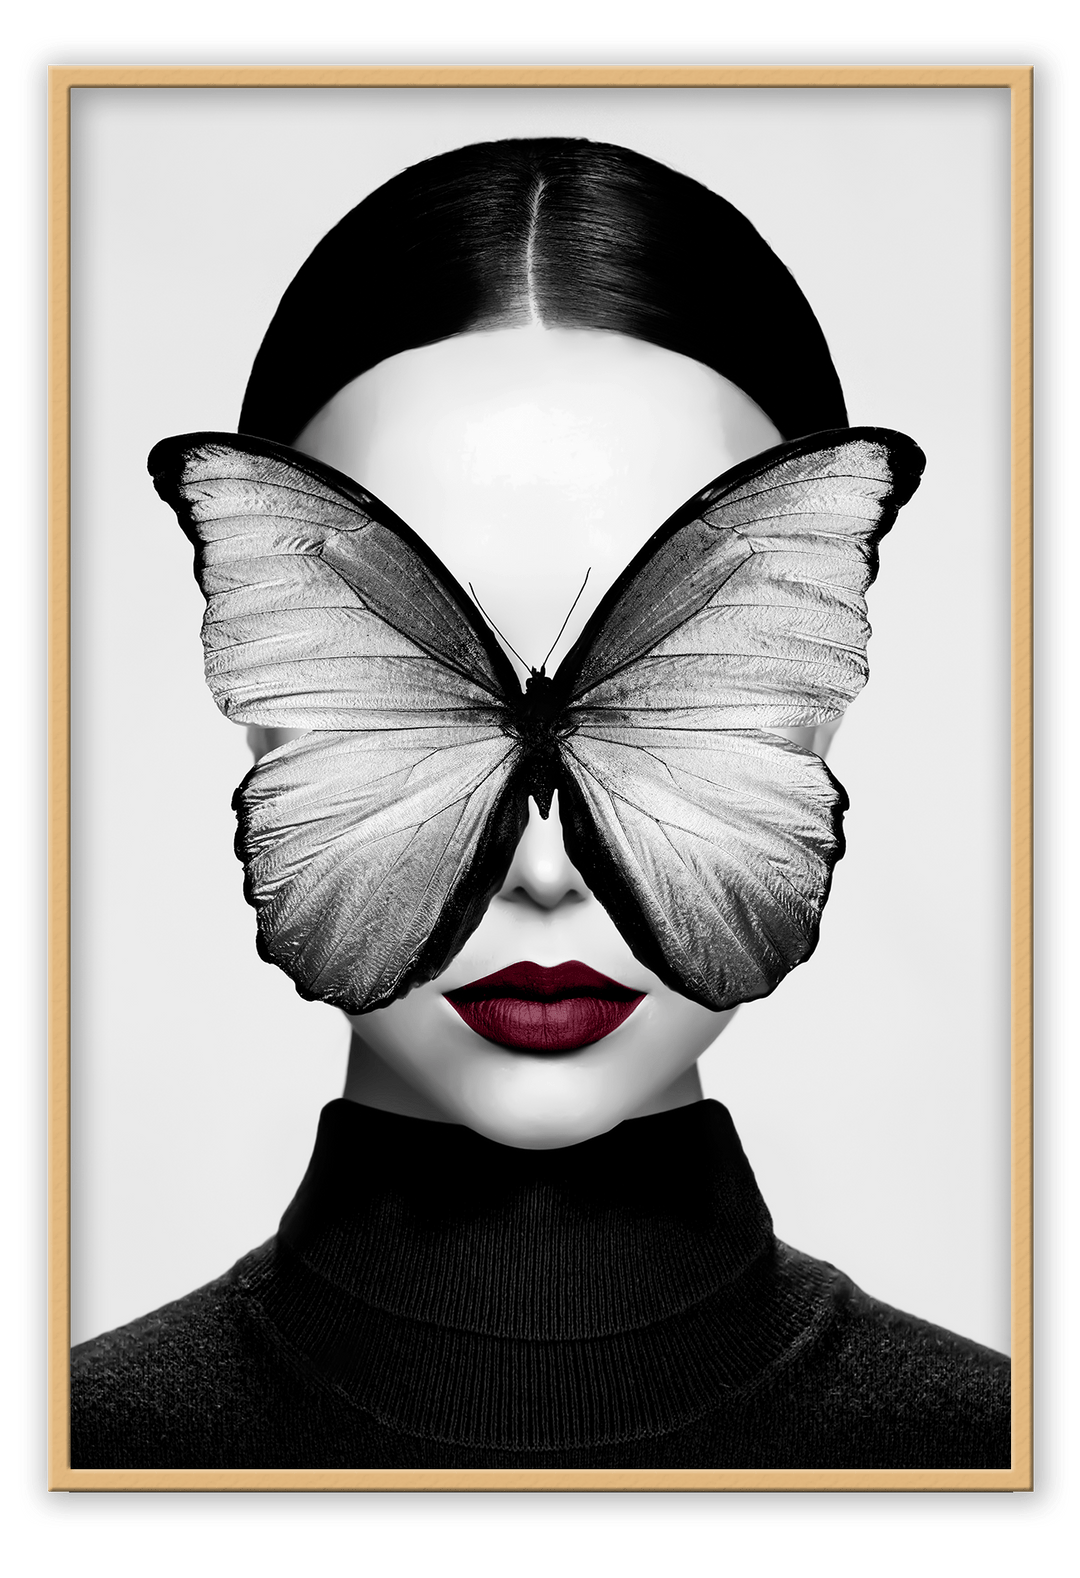 Canvas Prints 60x90cm / Natural Black Butterfly II Black Butterfly II Wall Art : Ready to hang framed artwork. Brand